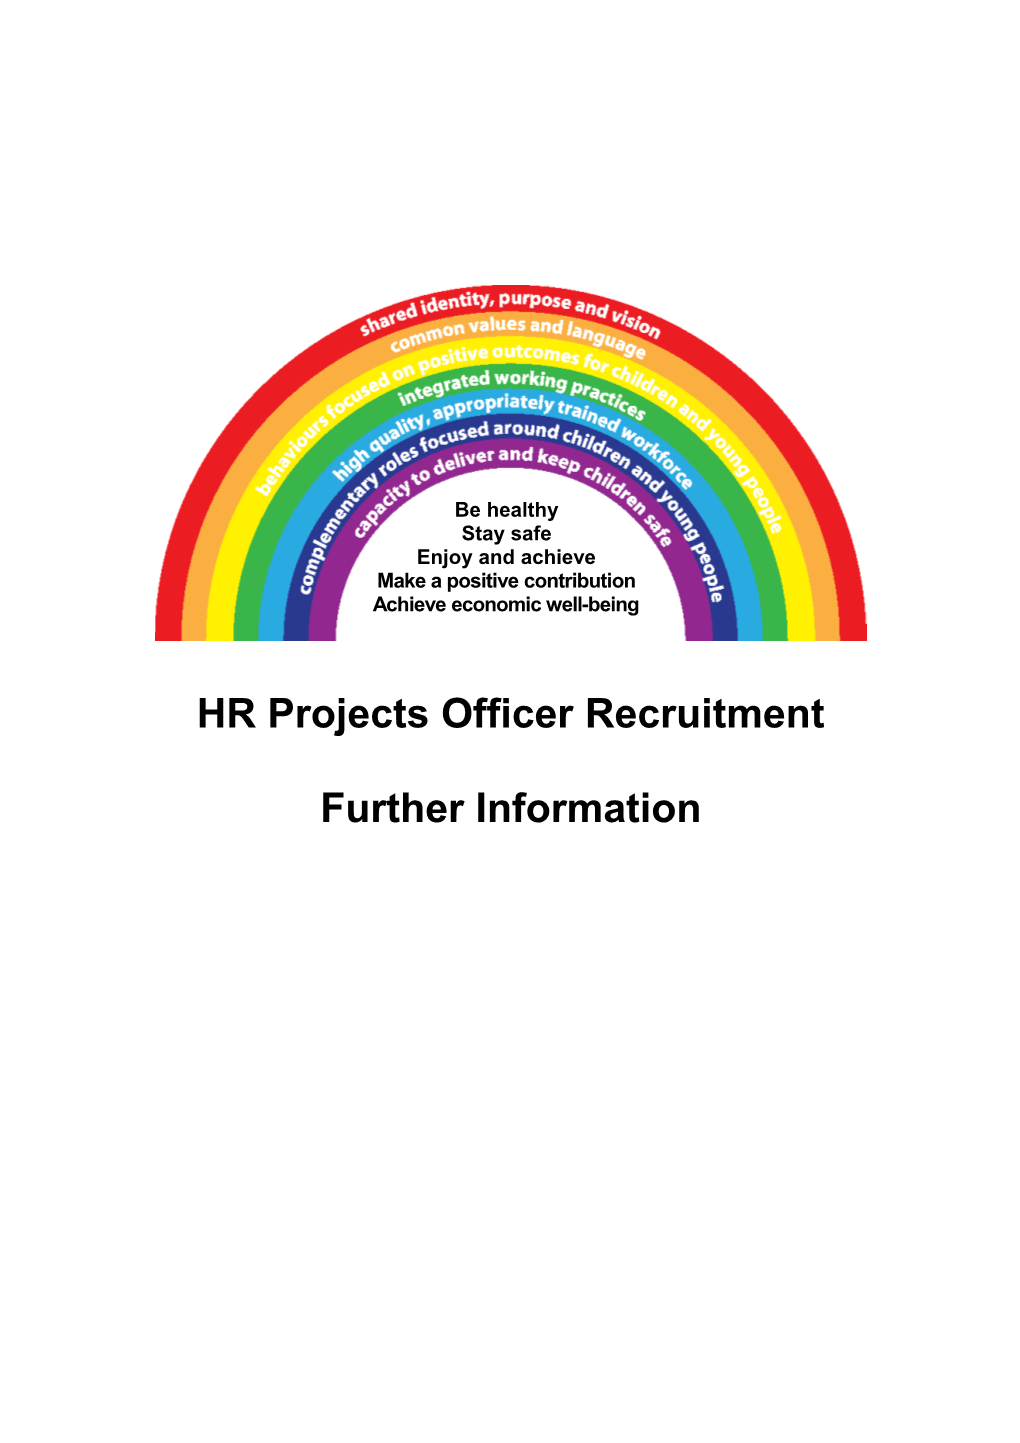 HR Projects Officer Recruitment